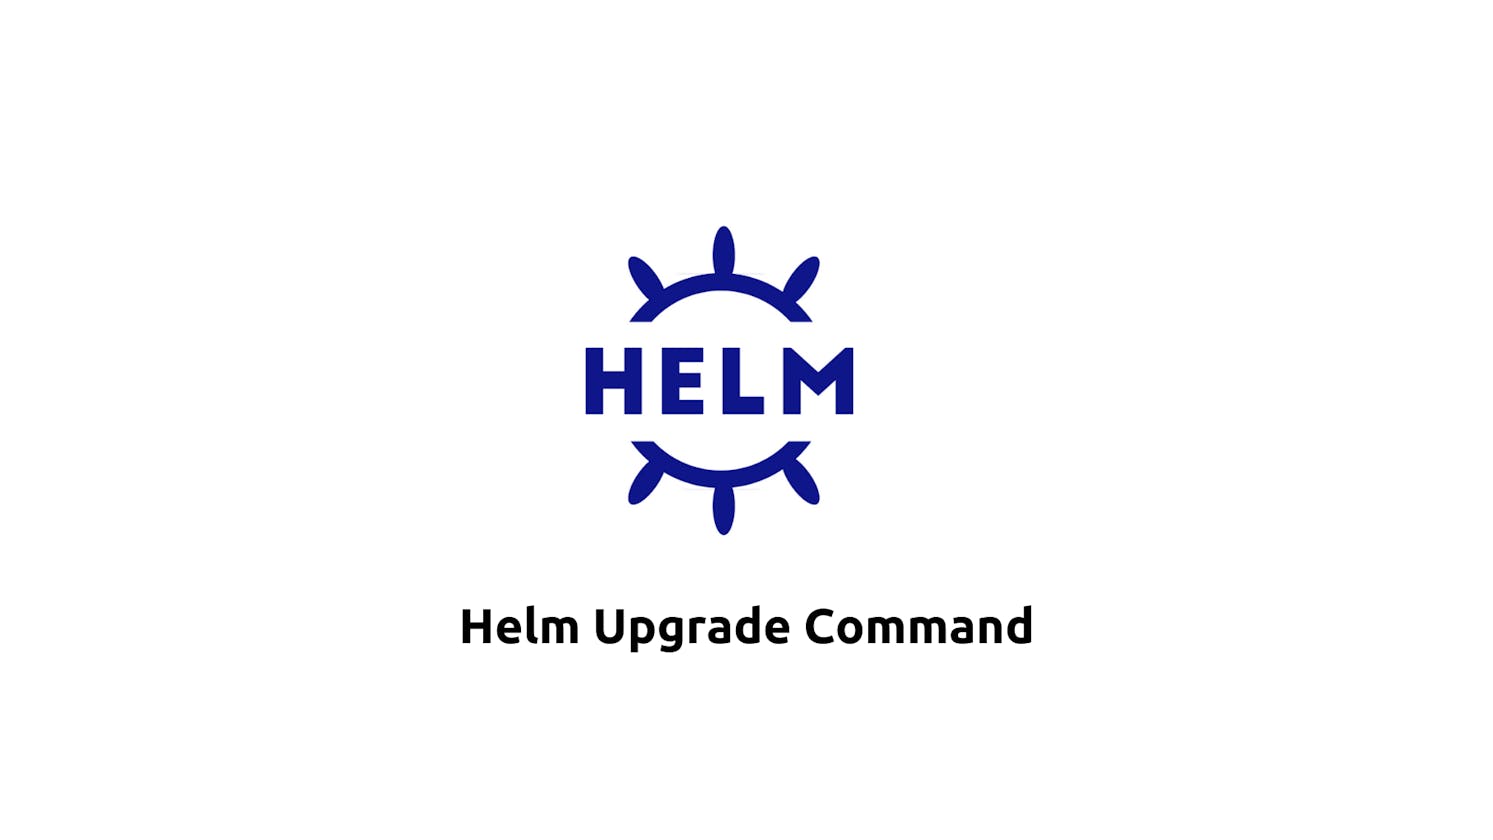 Harnessing Helm's Potential with Helm Upgrade Command